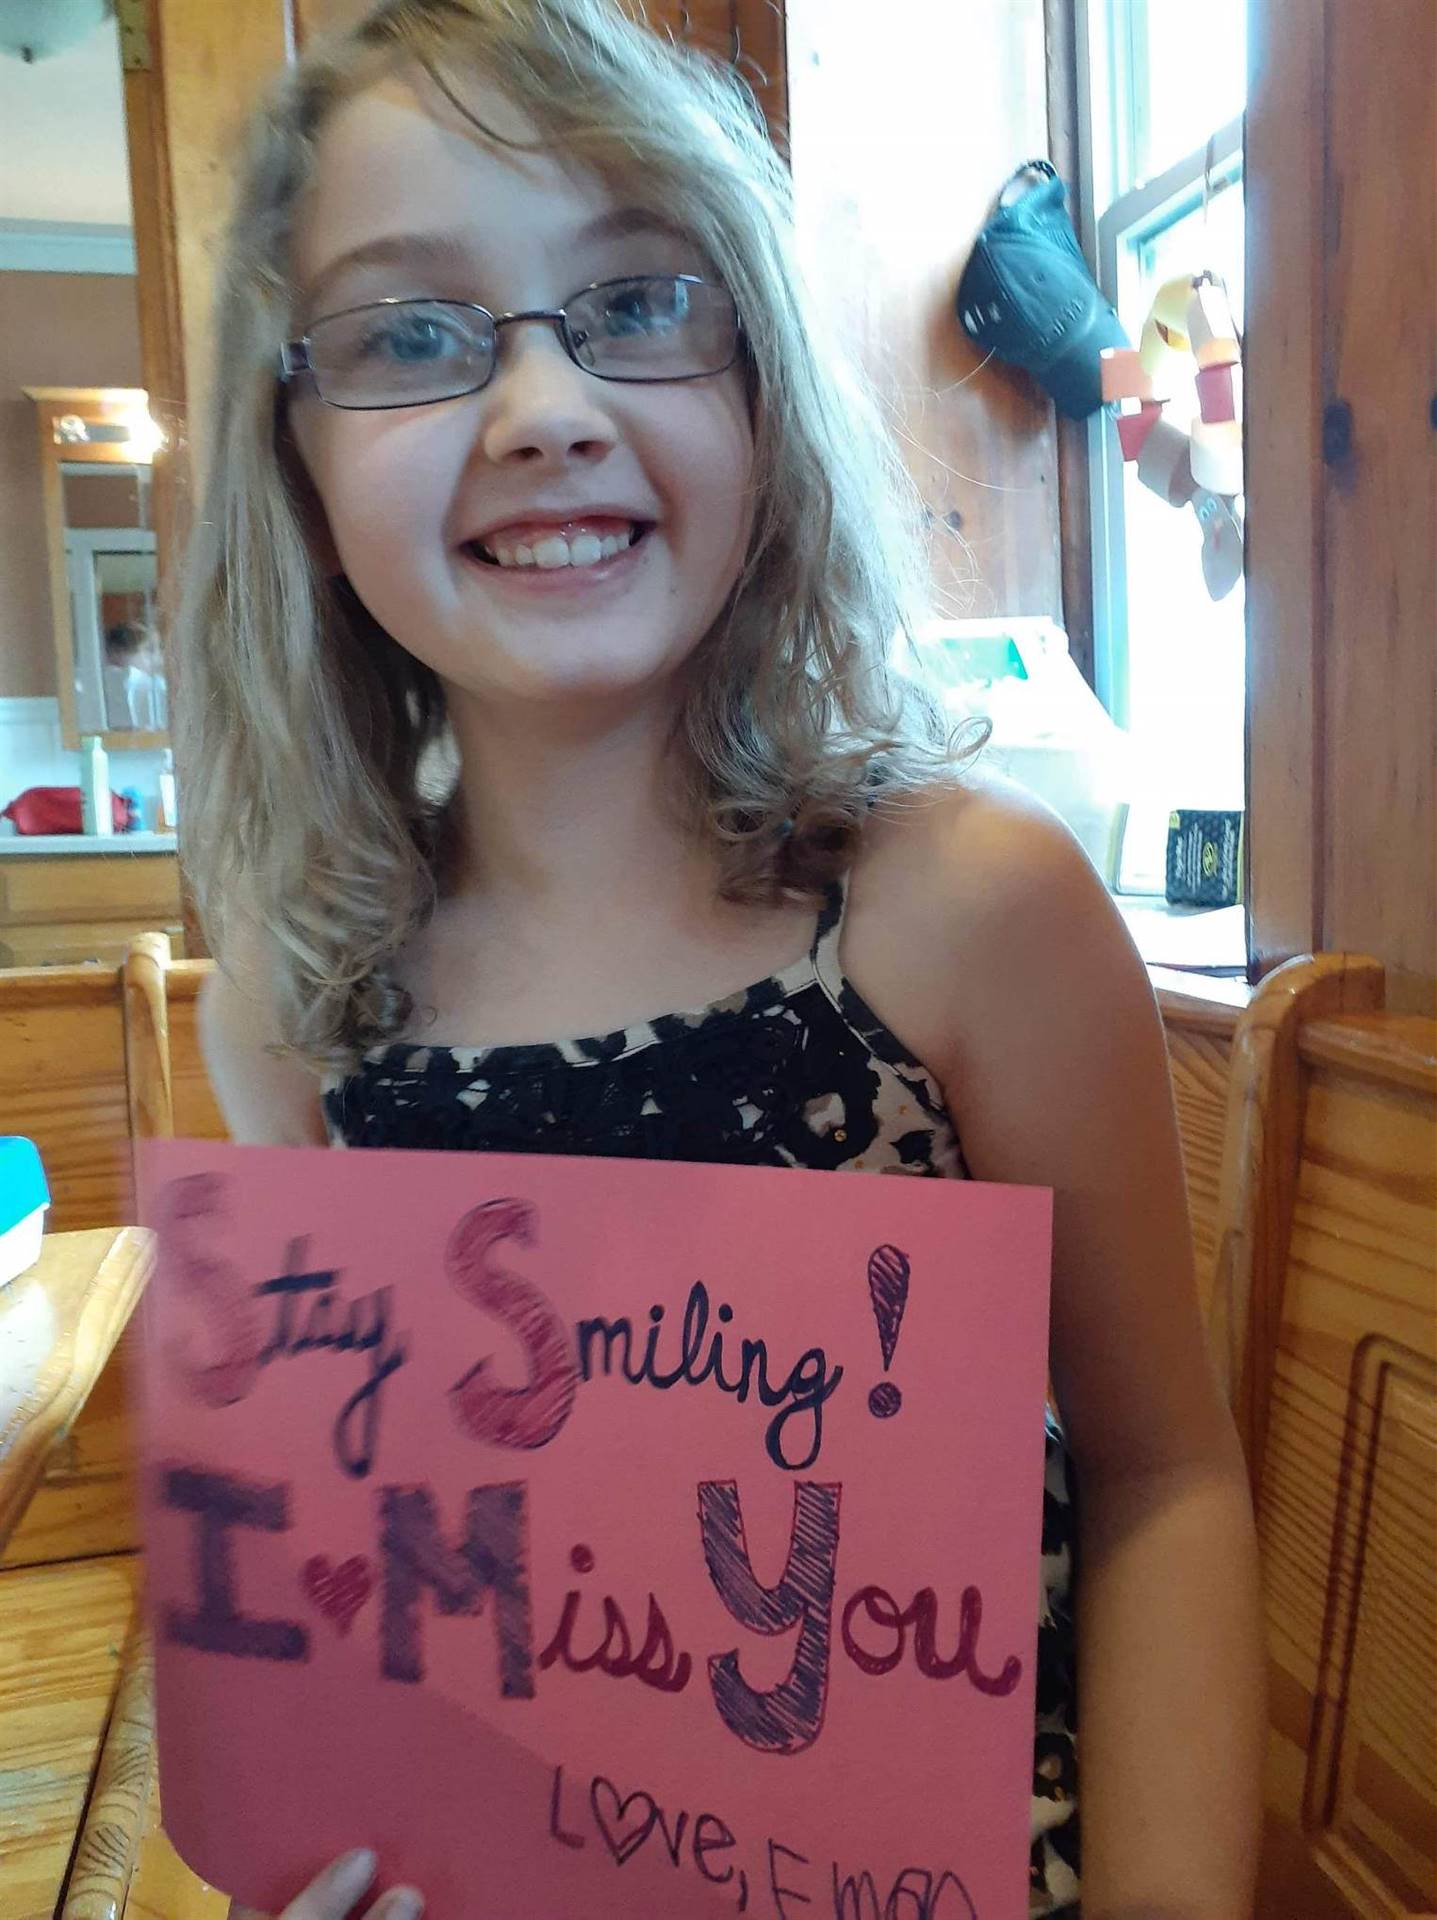 Student with "stay smiling I miss YOU sign